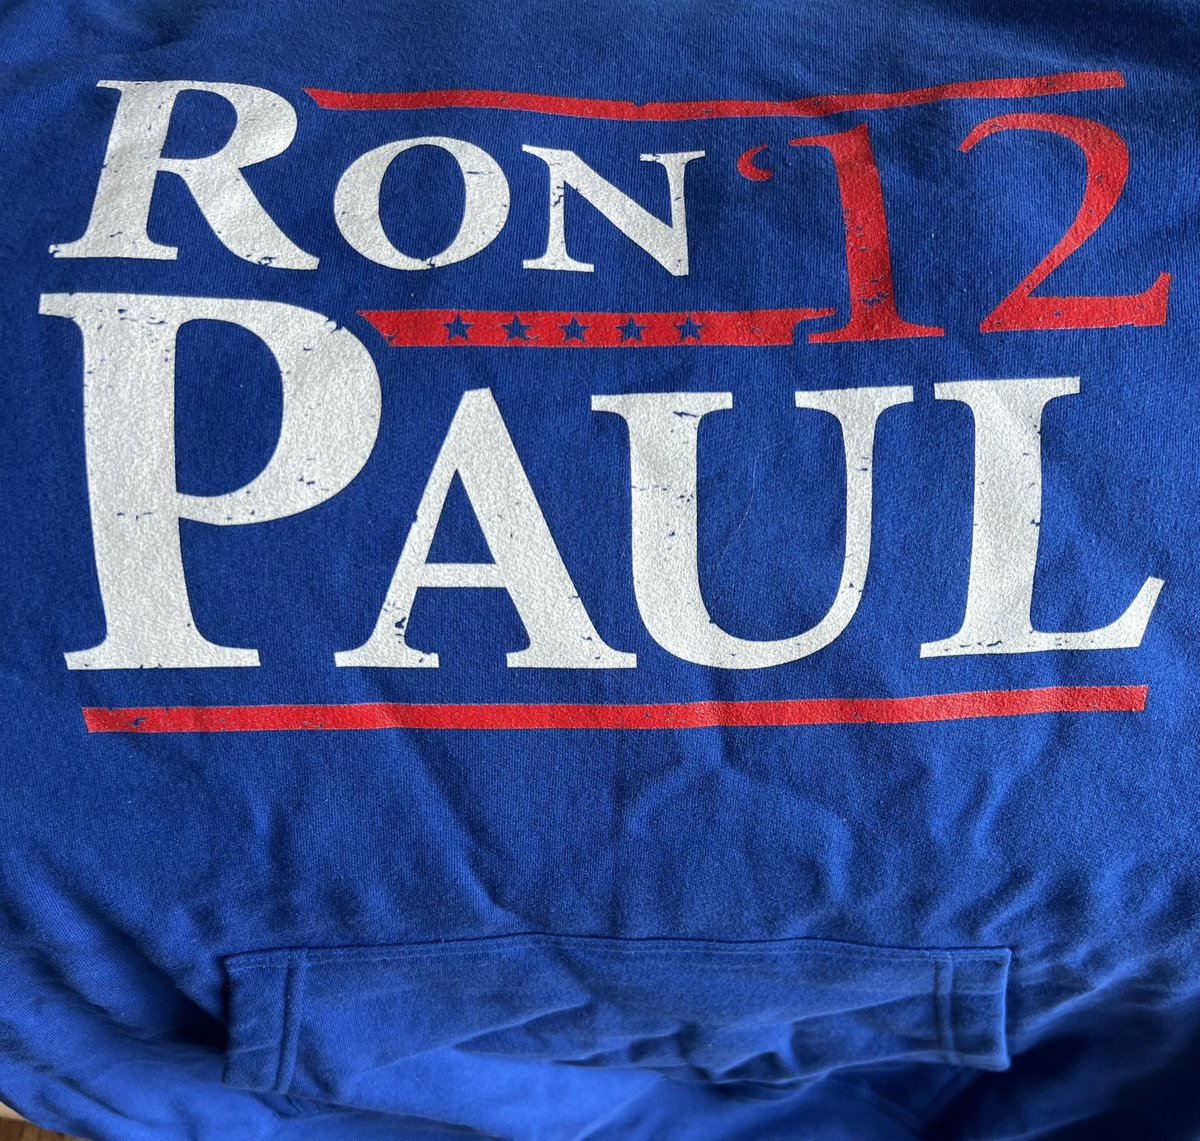 Time to bring you out of retirement!

@RonPaul was right!